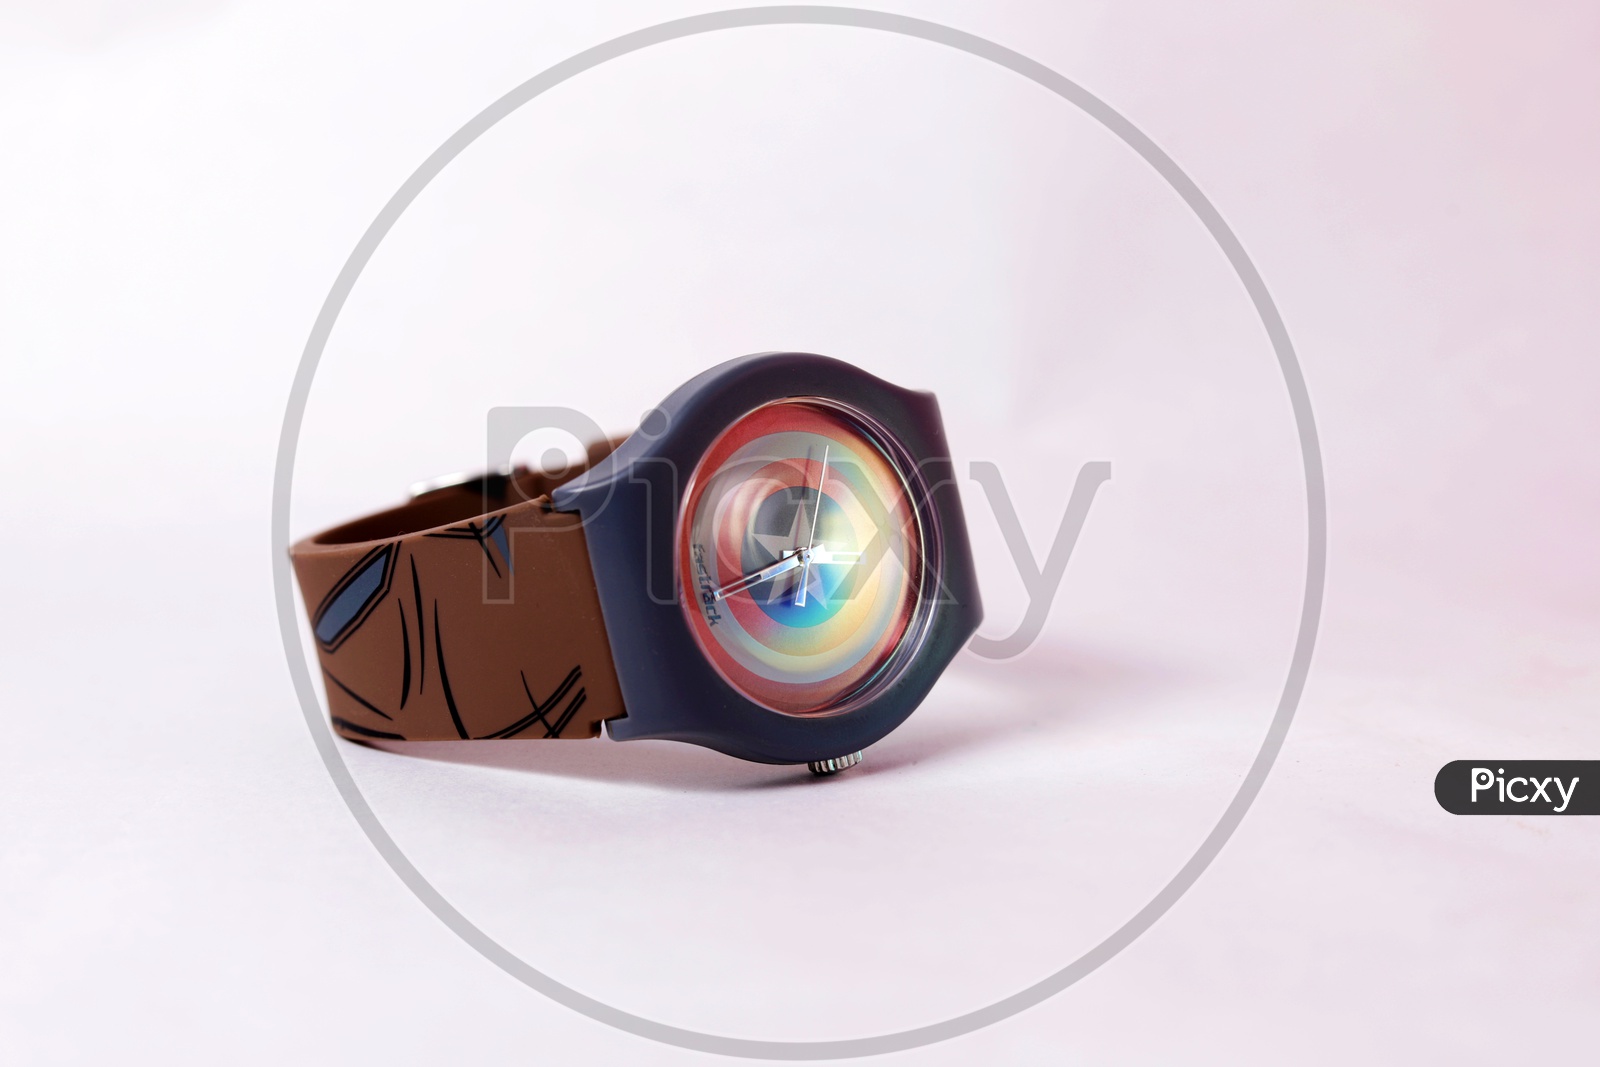 A fastrack watch with Captain America shield design.